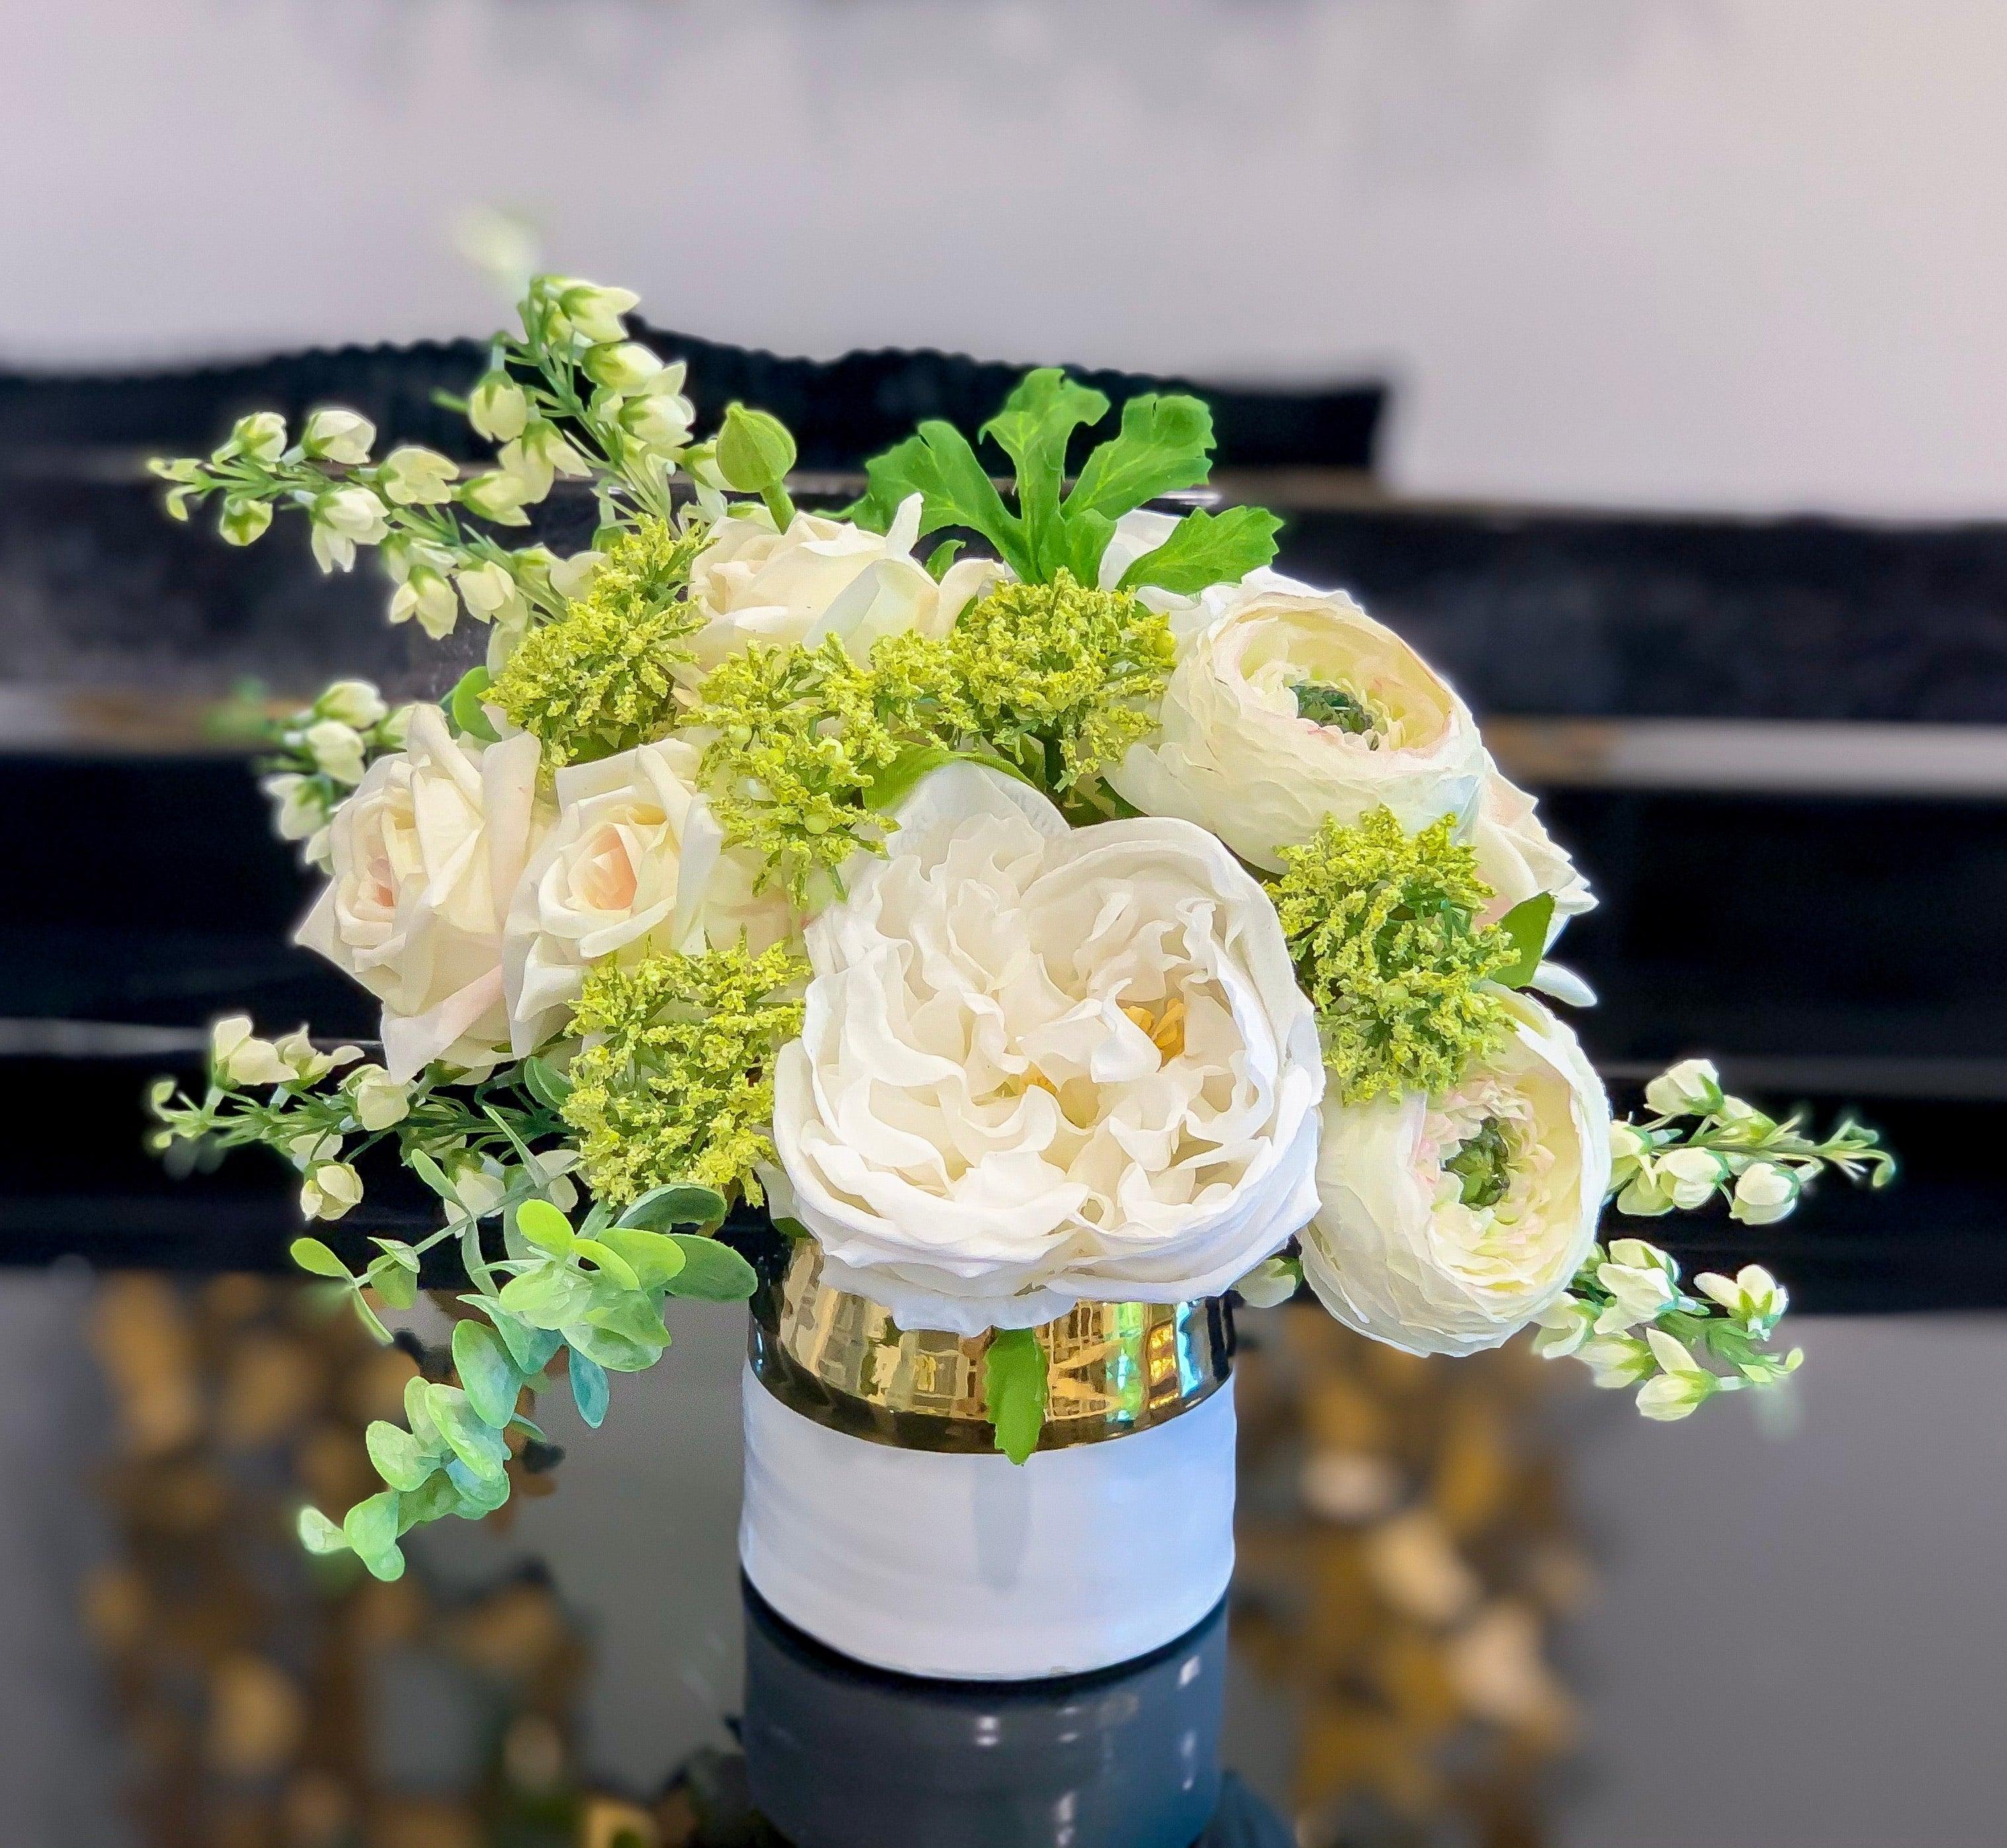 Pure Love Arrangement - Flovery Finest Real Touch Flower In Elegant Glossy Ceramic White Gold Vase - Flovery